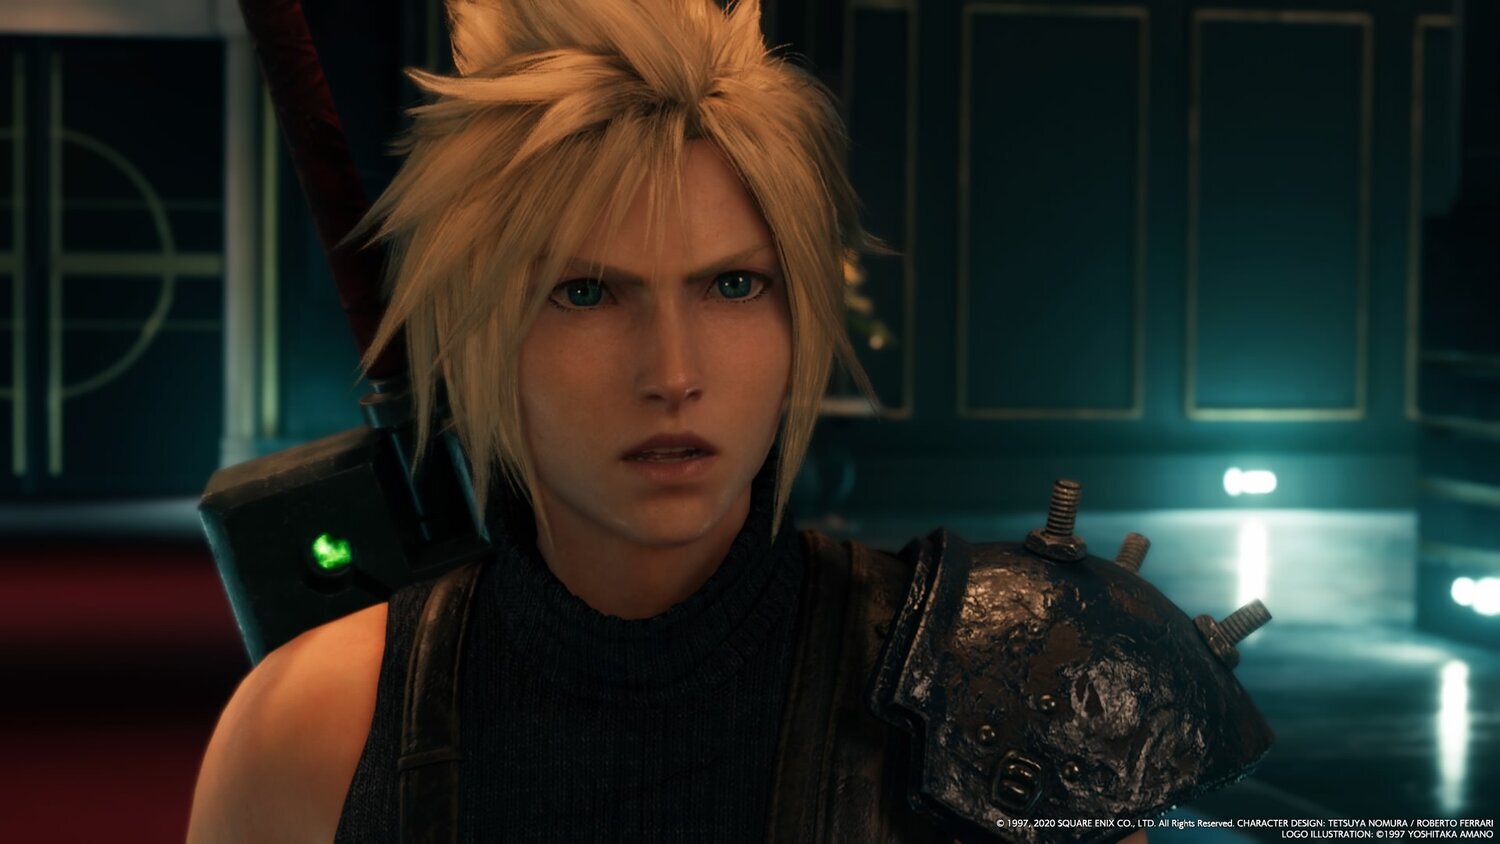 Final Fantasy Vii Remake Has A Scene That Will Assuredly Confuse New